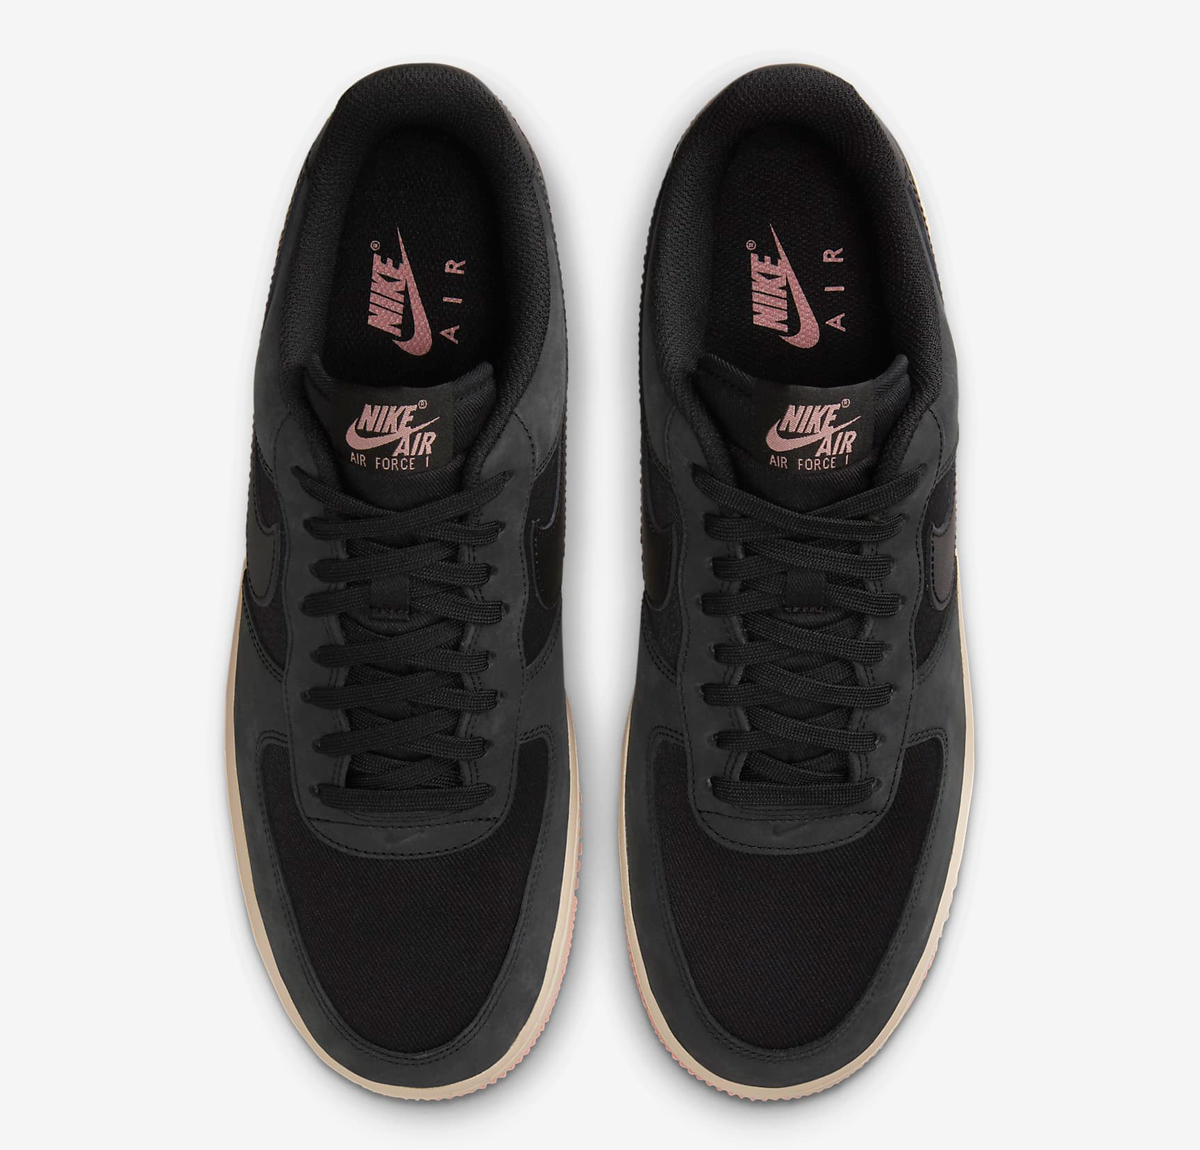 Nike-Air-Force-1-Low-LX-Black-Red-Stardust-Release-Date-4